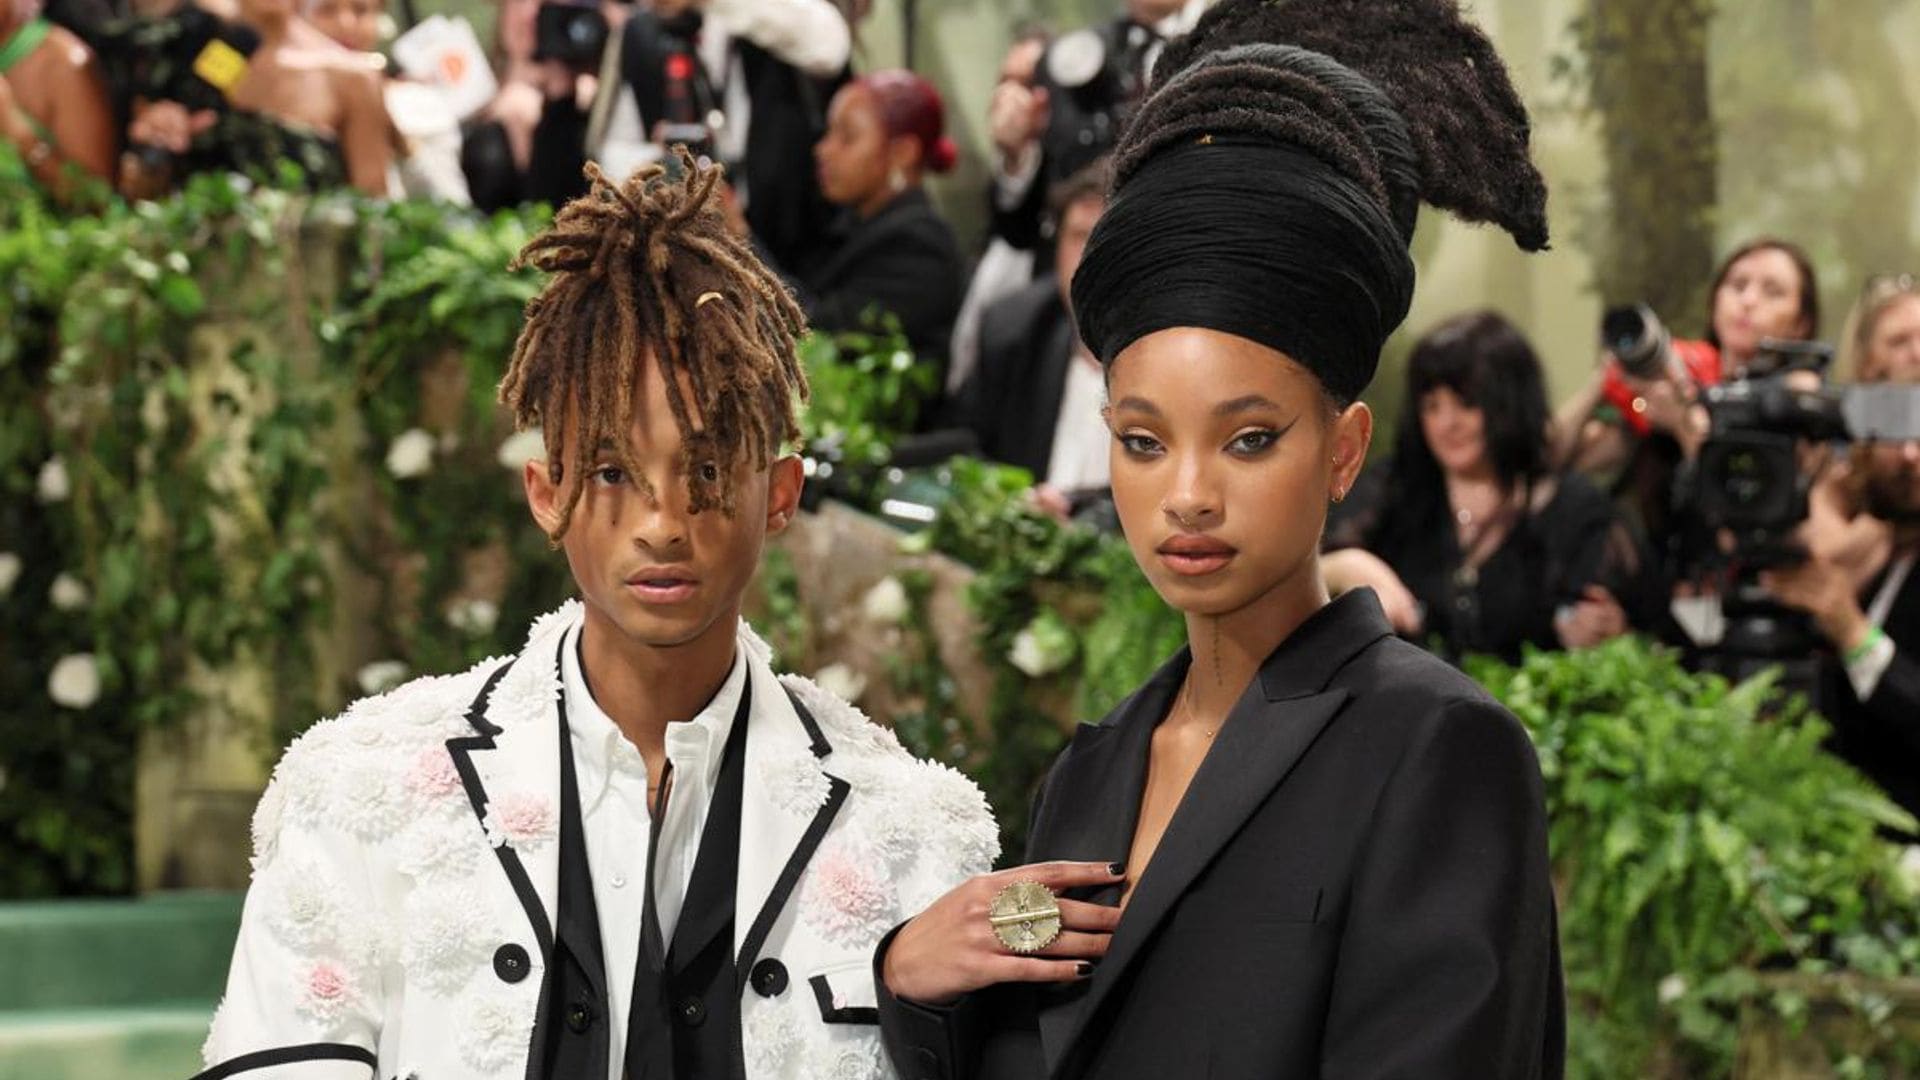 Willow and Jaden Smith attend the Met Gala in matching looks